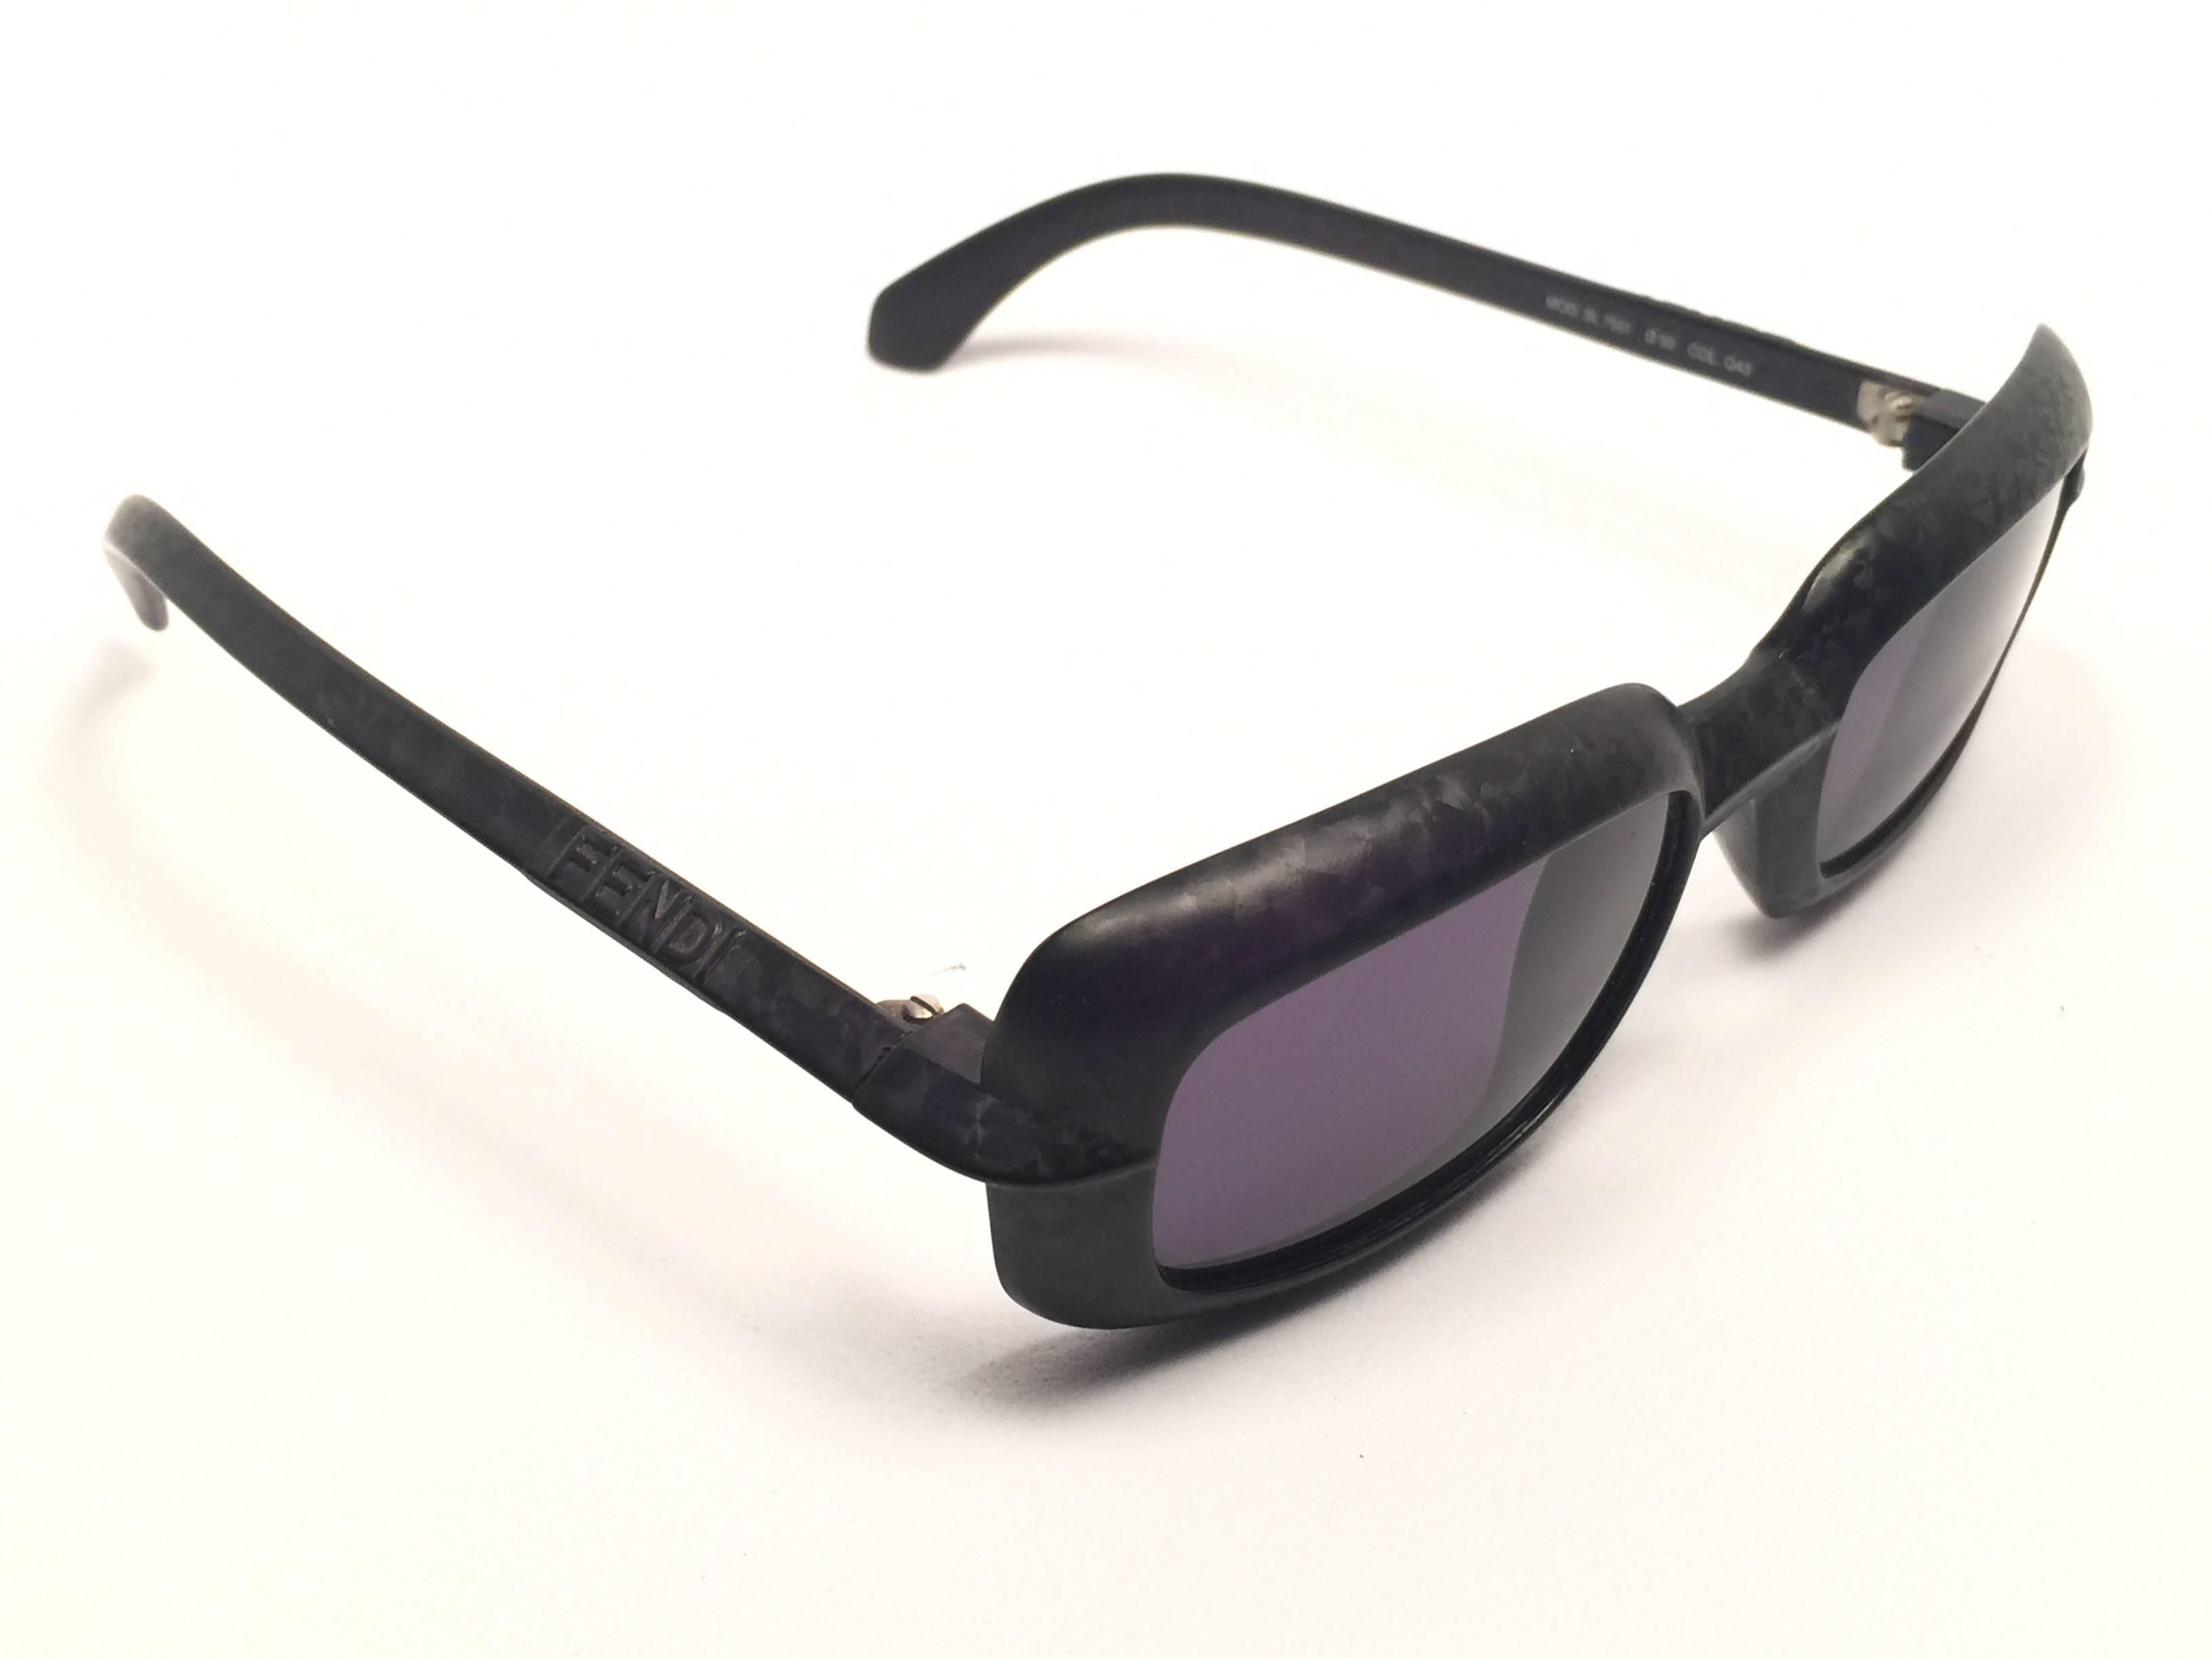 New Fendi textured square black matte frame with grey G15 ( UV protection ) lenses.

Made in Italy.
 
Produced and design in 1990's.

New, never worn or displayed.